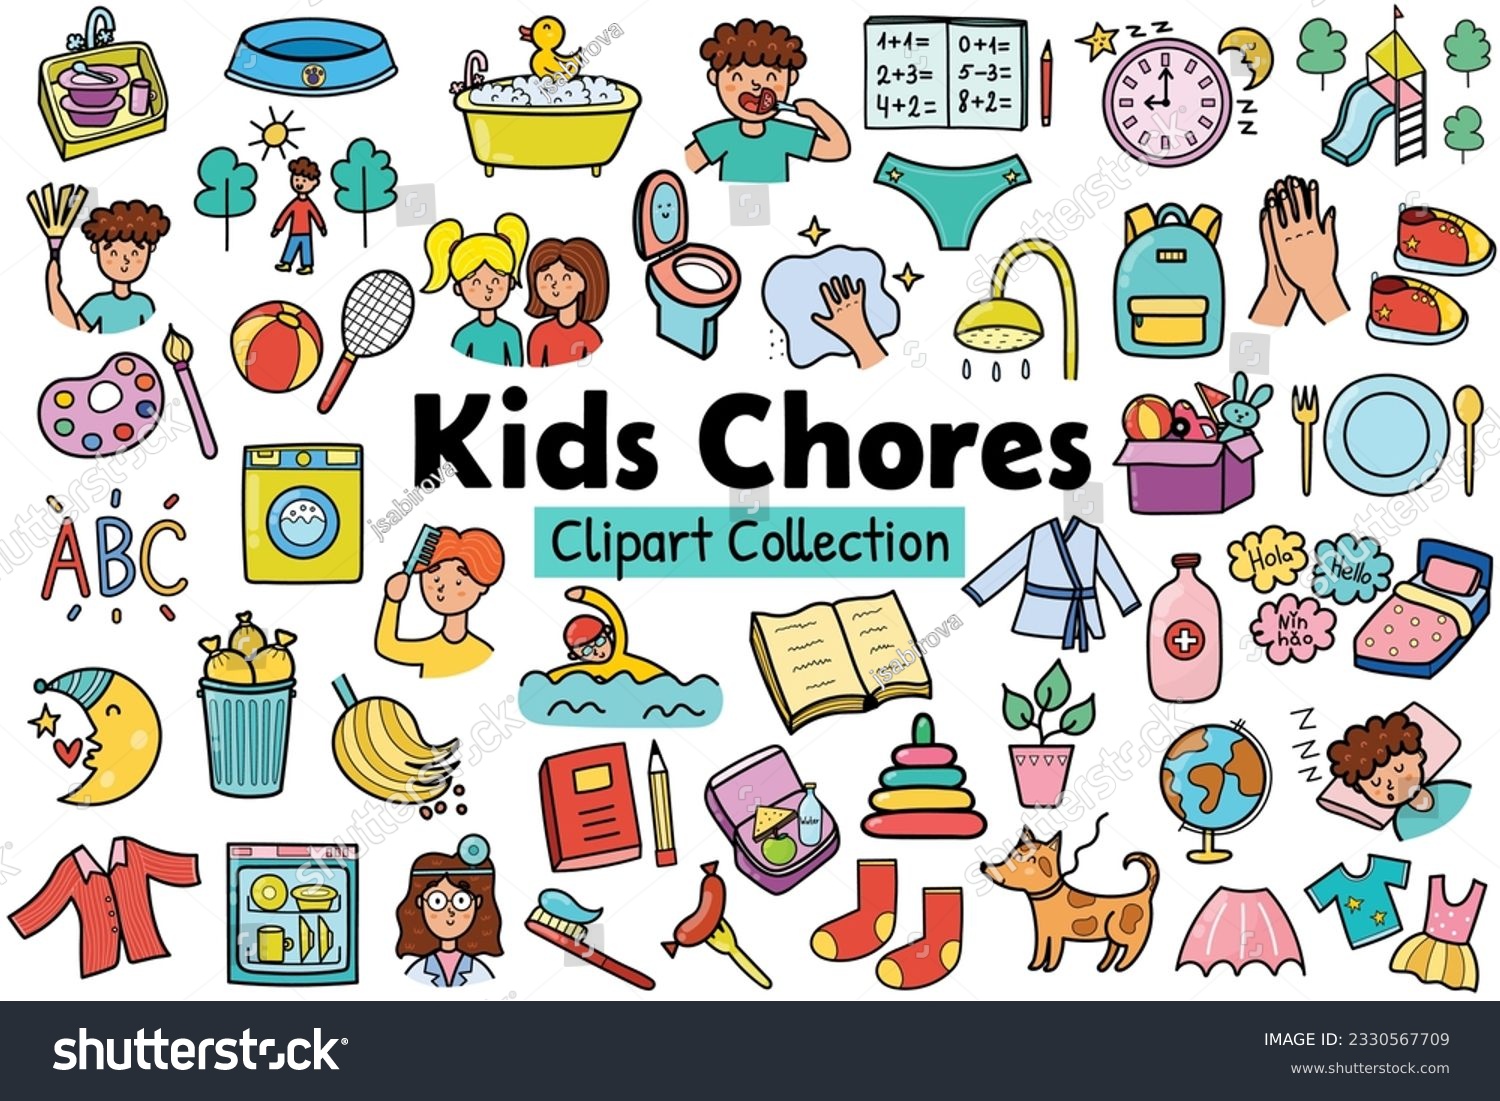 SVG of Kids chores clipart collection. Daily routine icons set. Tasks stickers for creating reward chart. Vector illustration svg